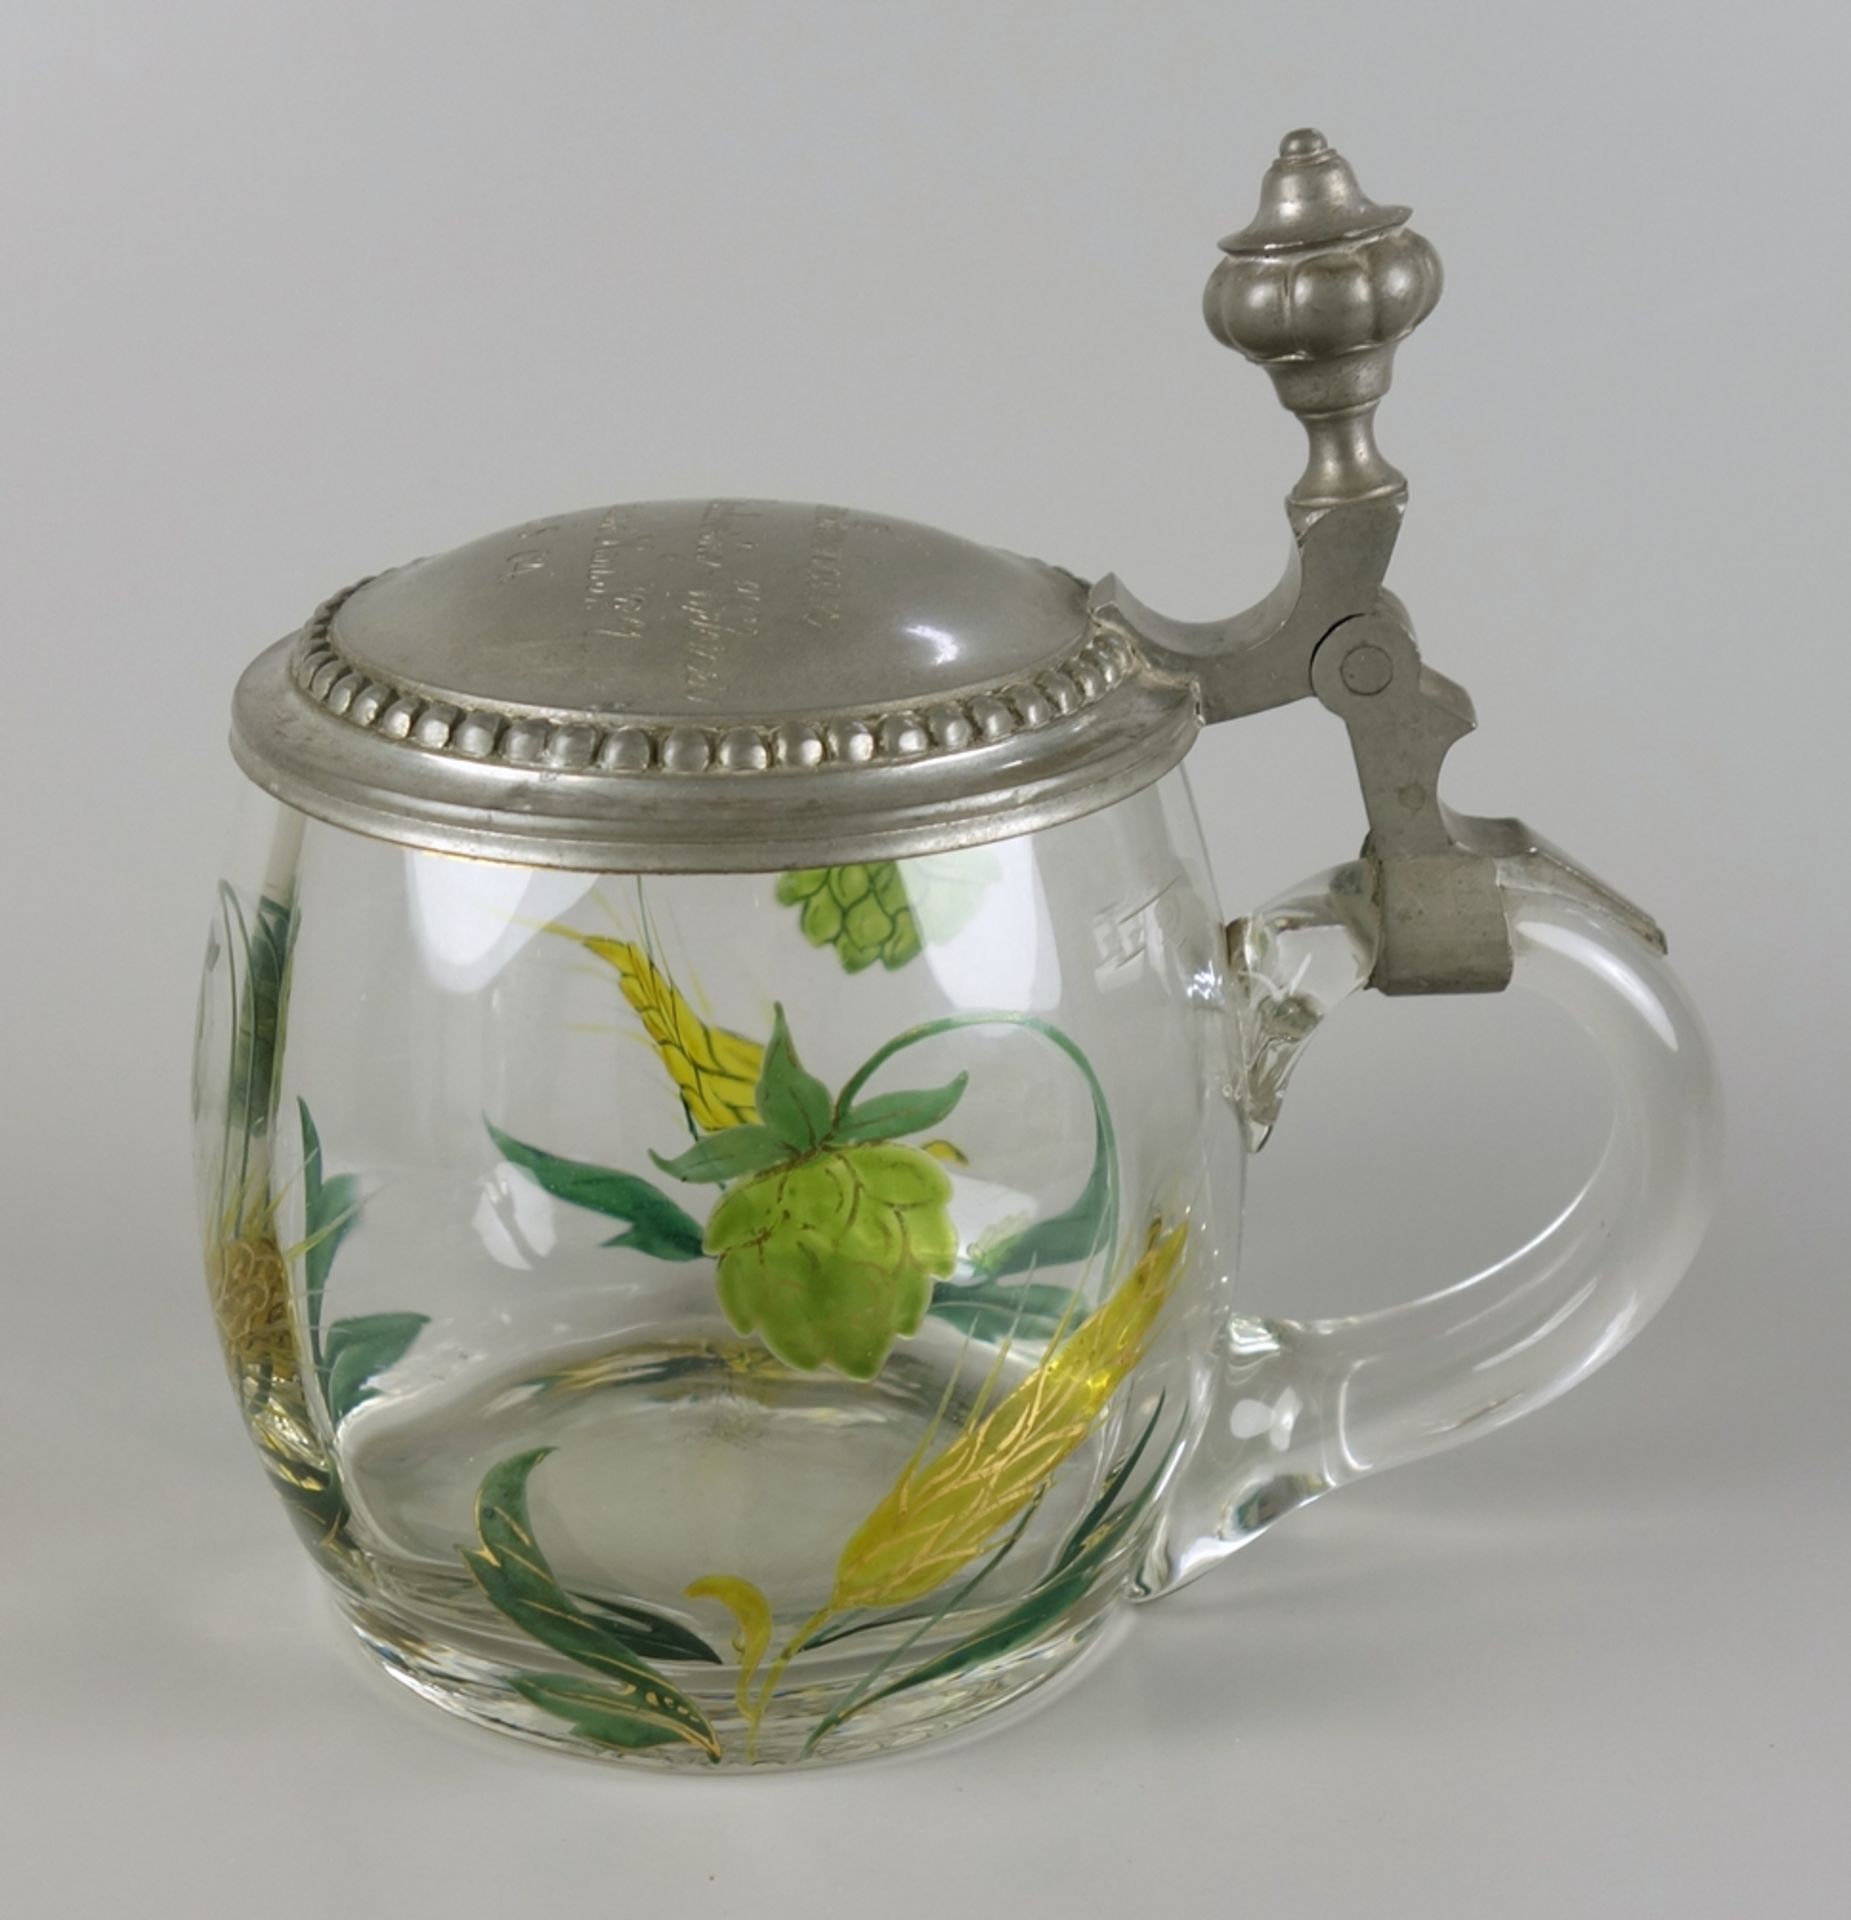 Beer stein dedicated to Count von Posadowsky- Wehner, dated 1904 - Image 3 of 3